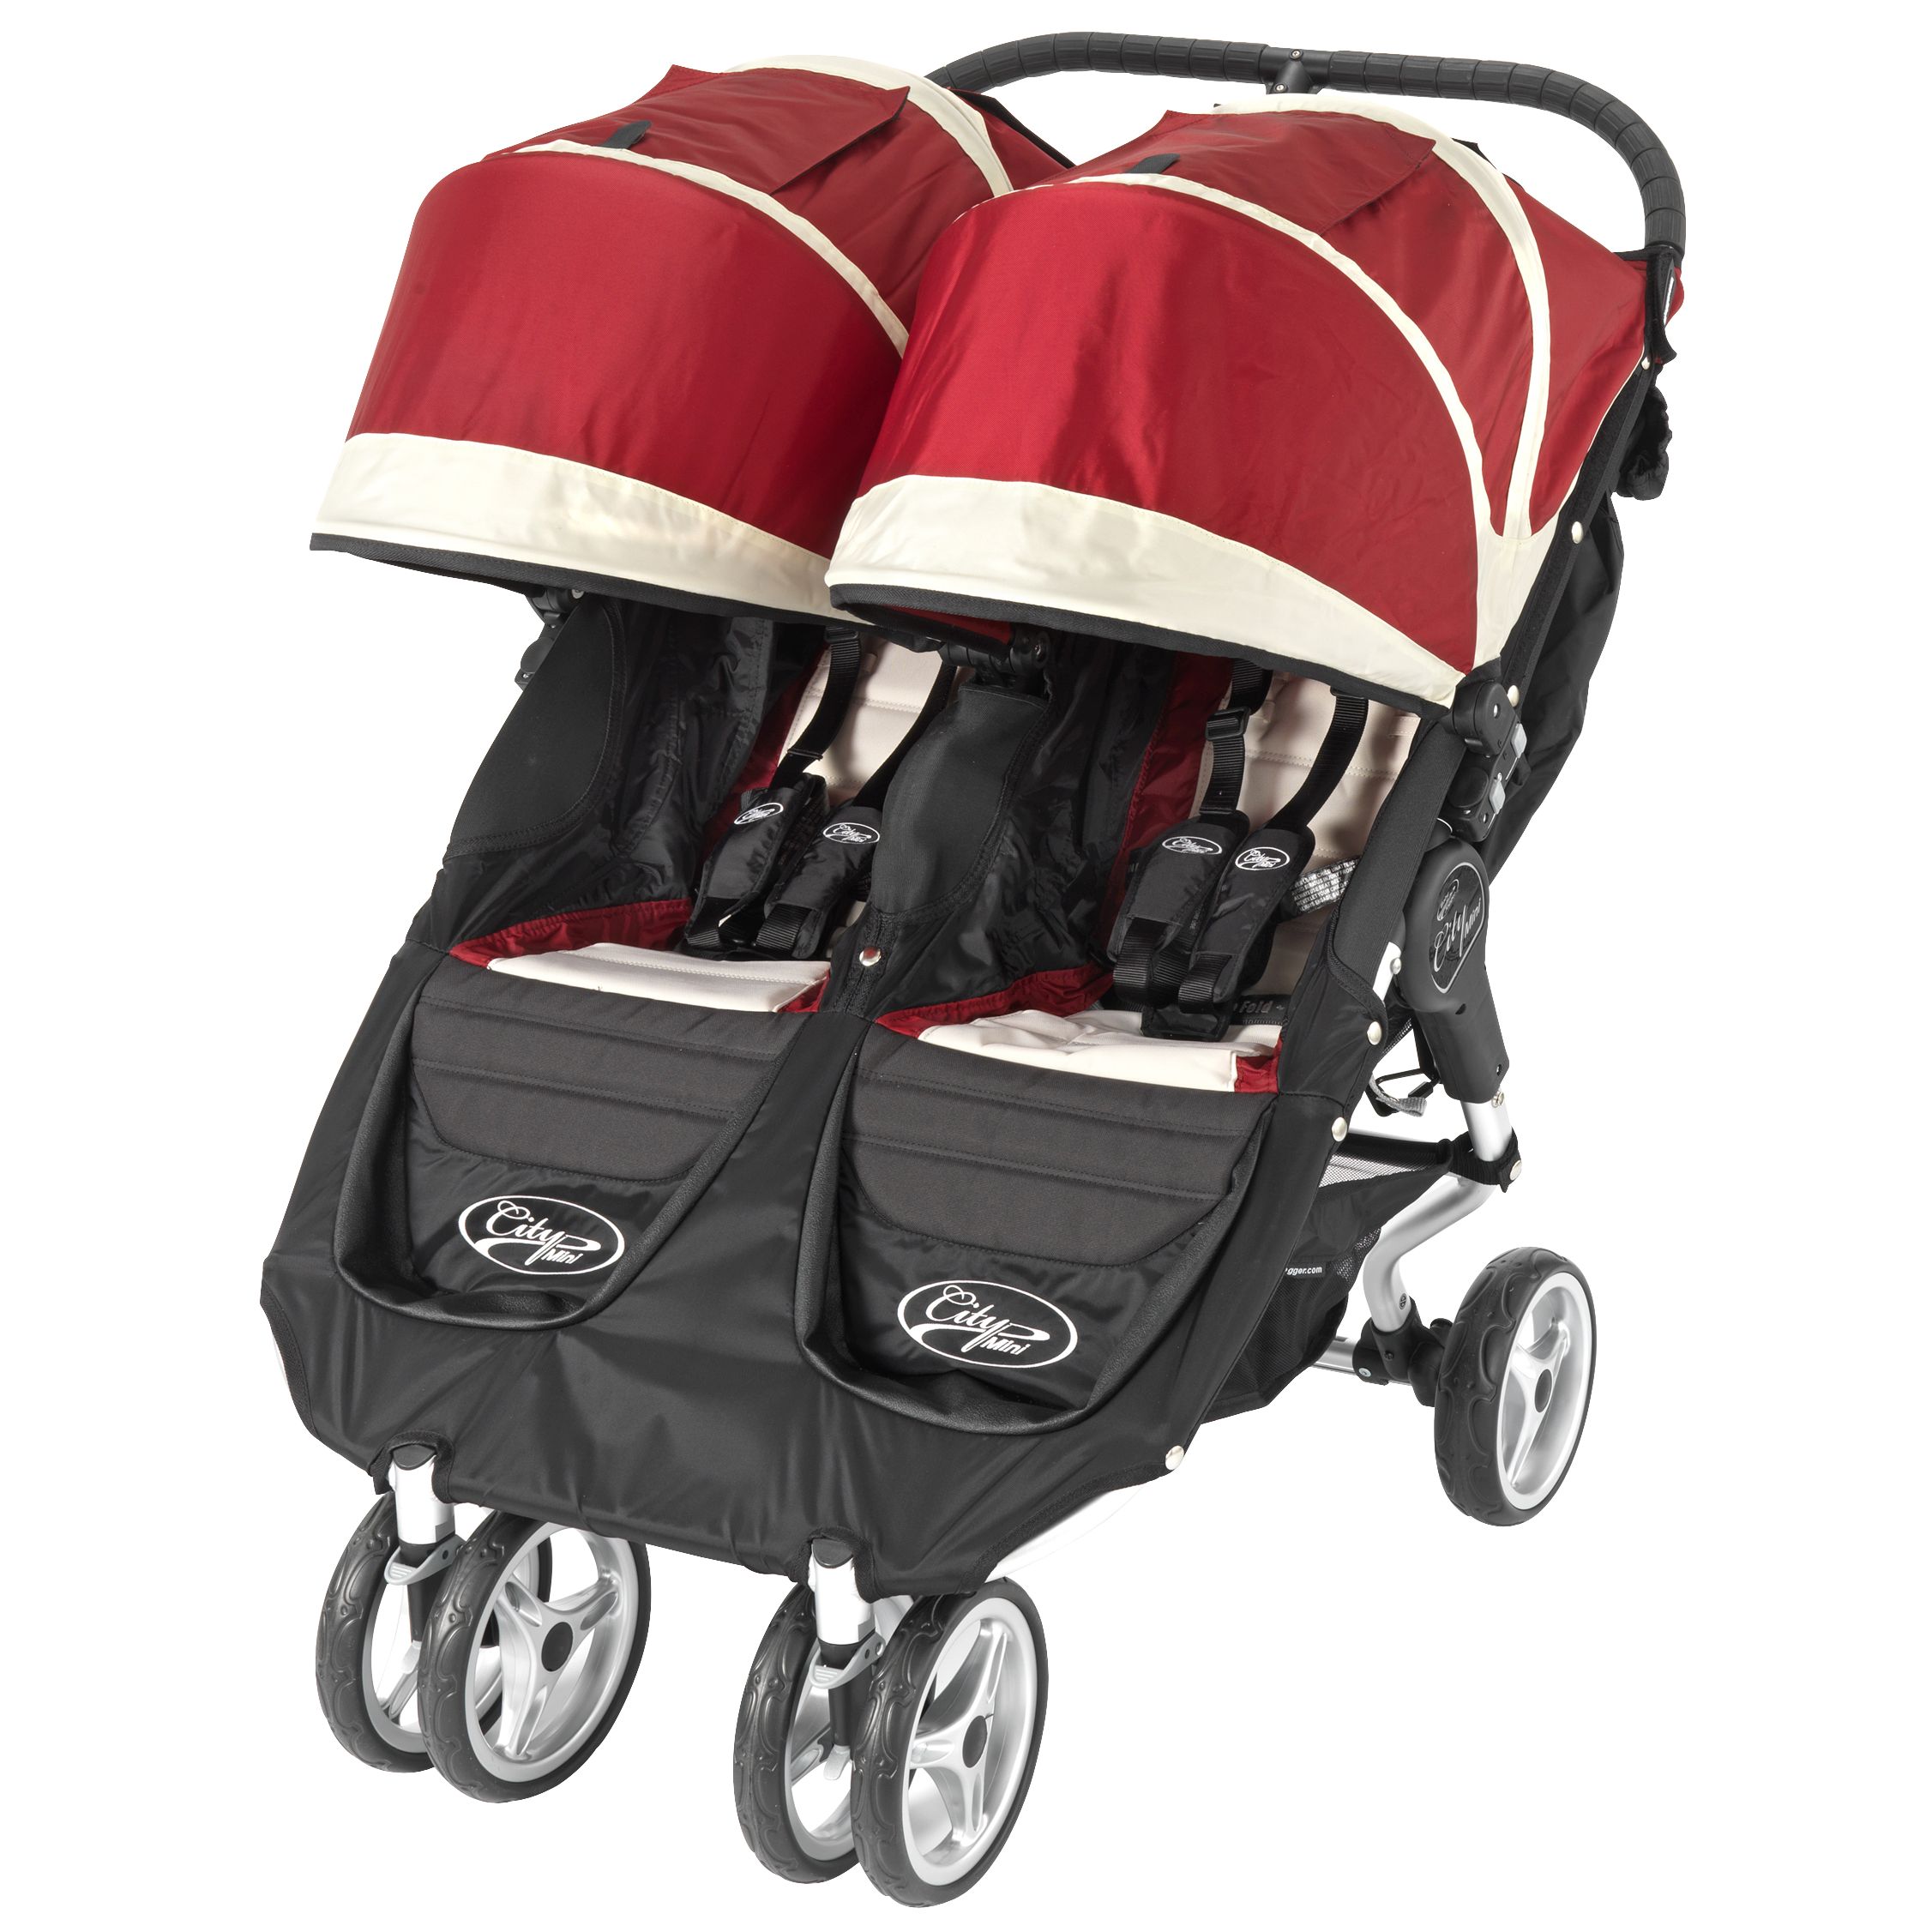 Baby Jogger City Mini Twin Pushchair, Red/Black at John Lewis